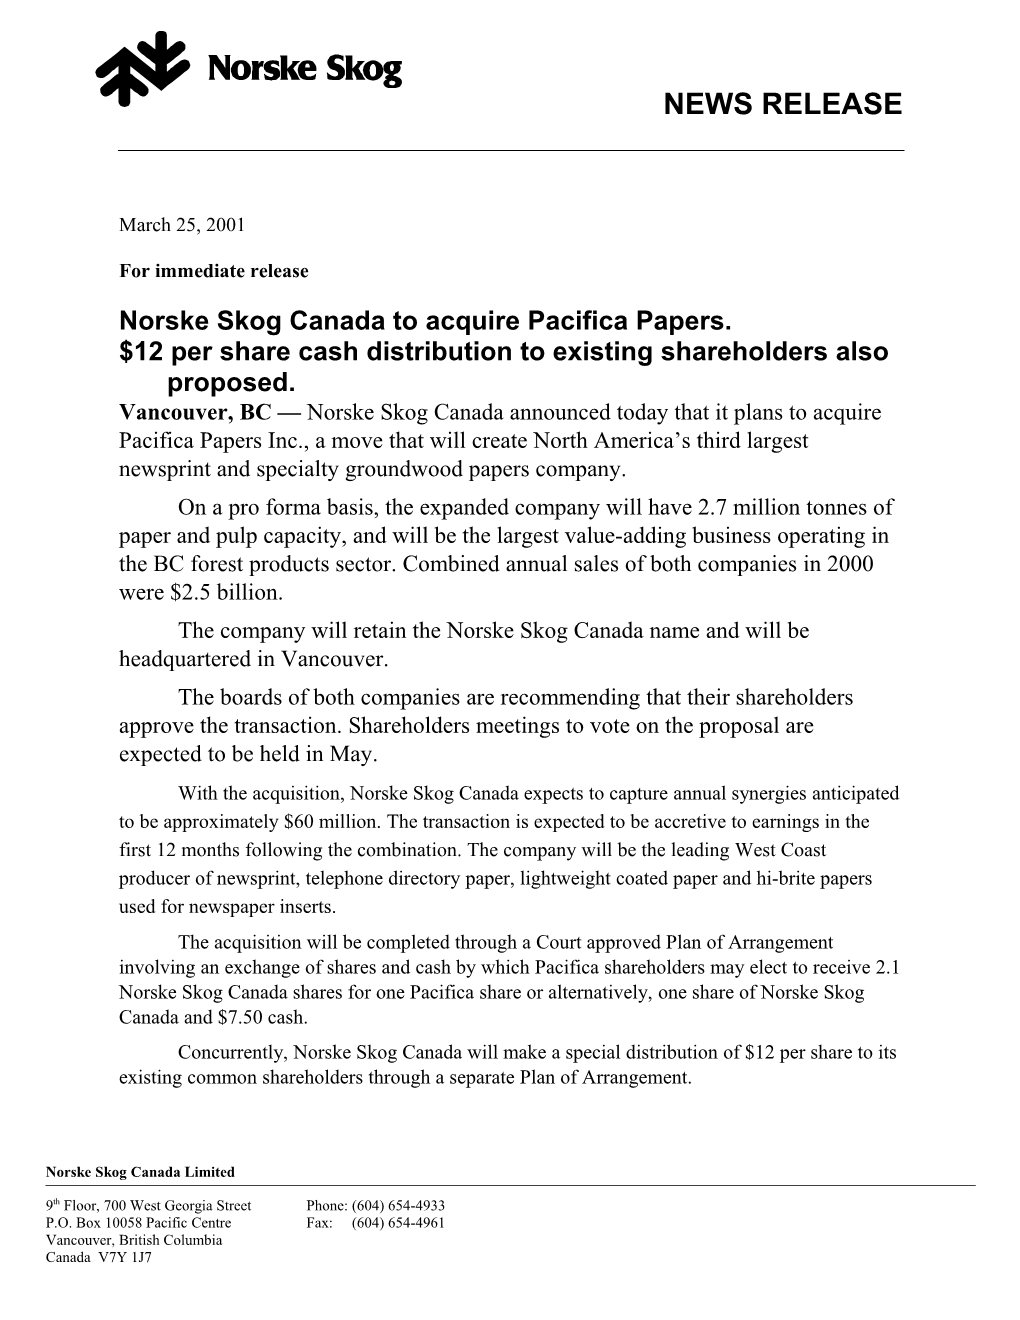 Norske Skog Canada to Acquire Pacifica Papers